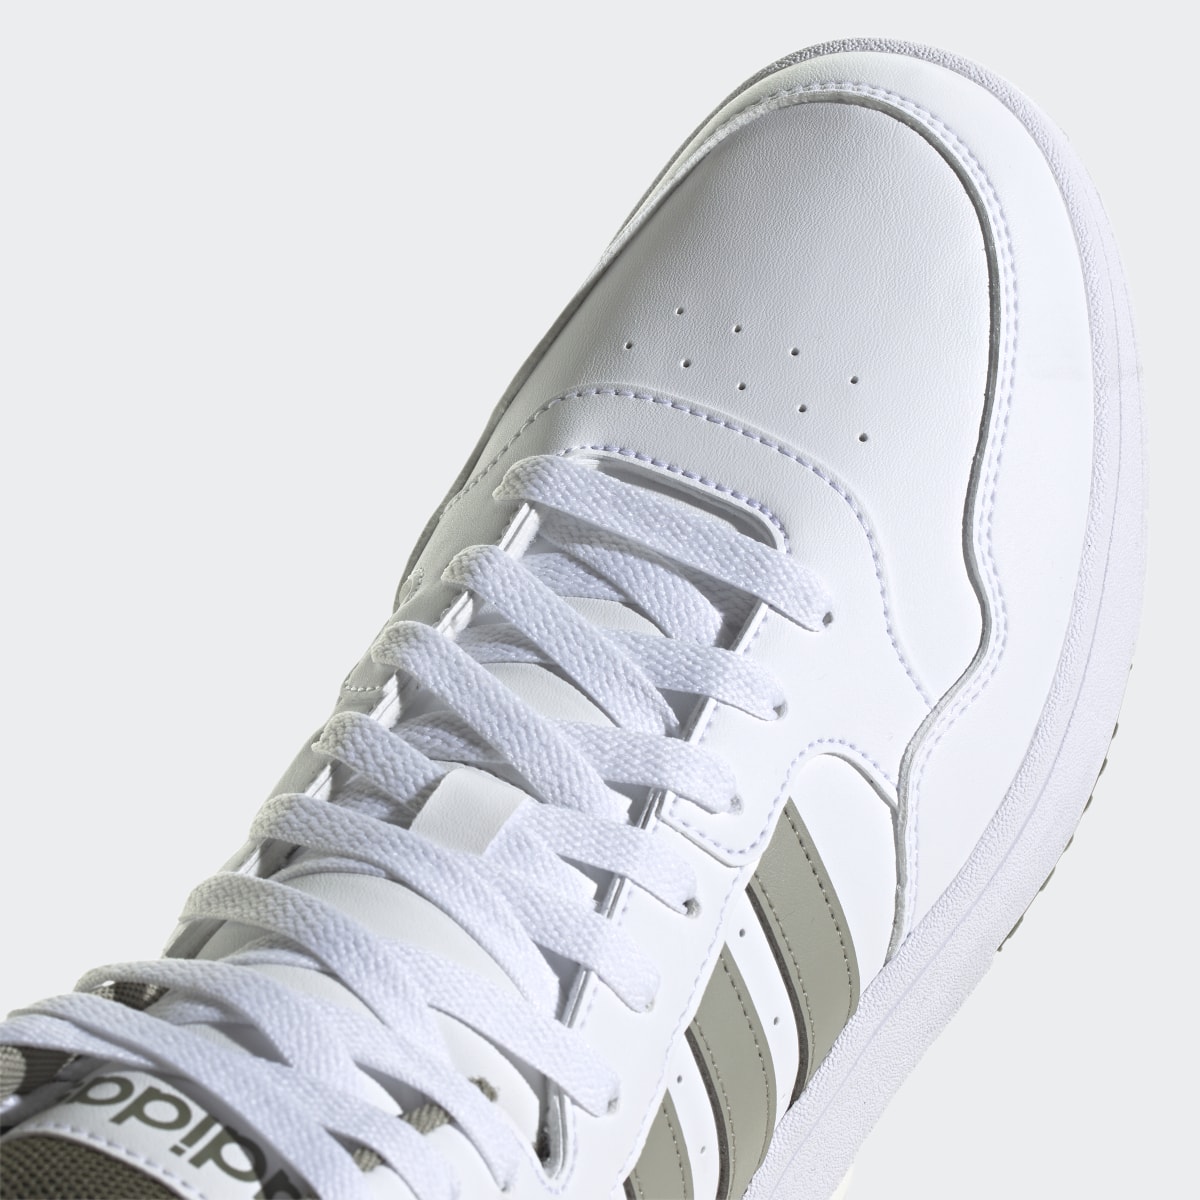 Adidas Hoops 3.0 Mid Classic Vintage Shoes. 10